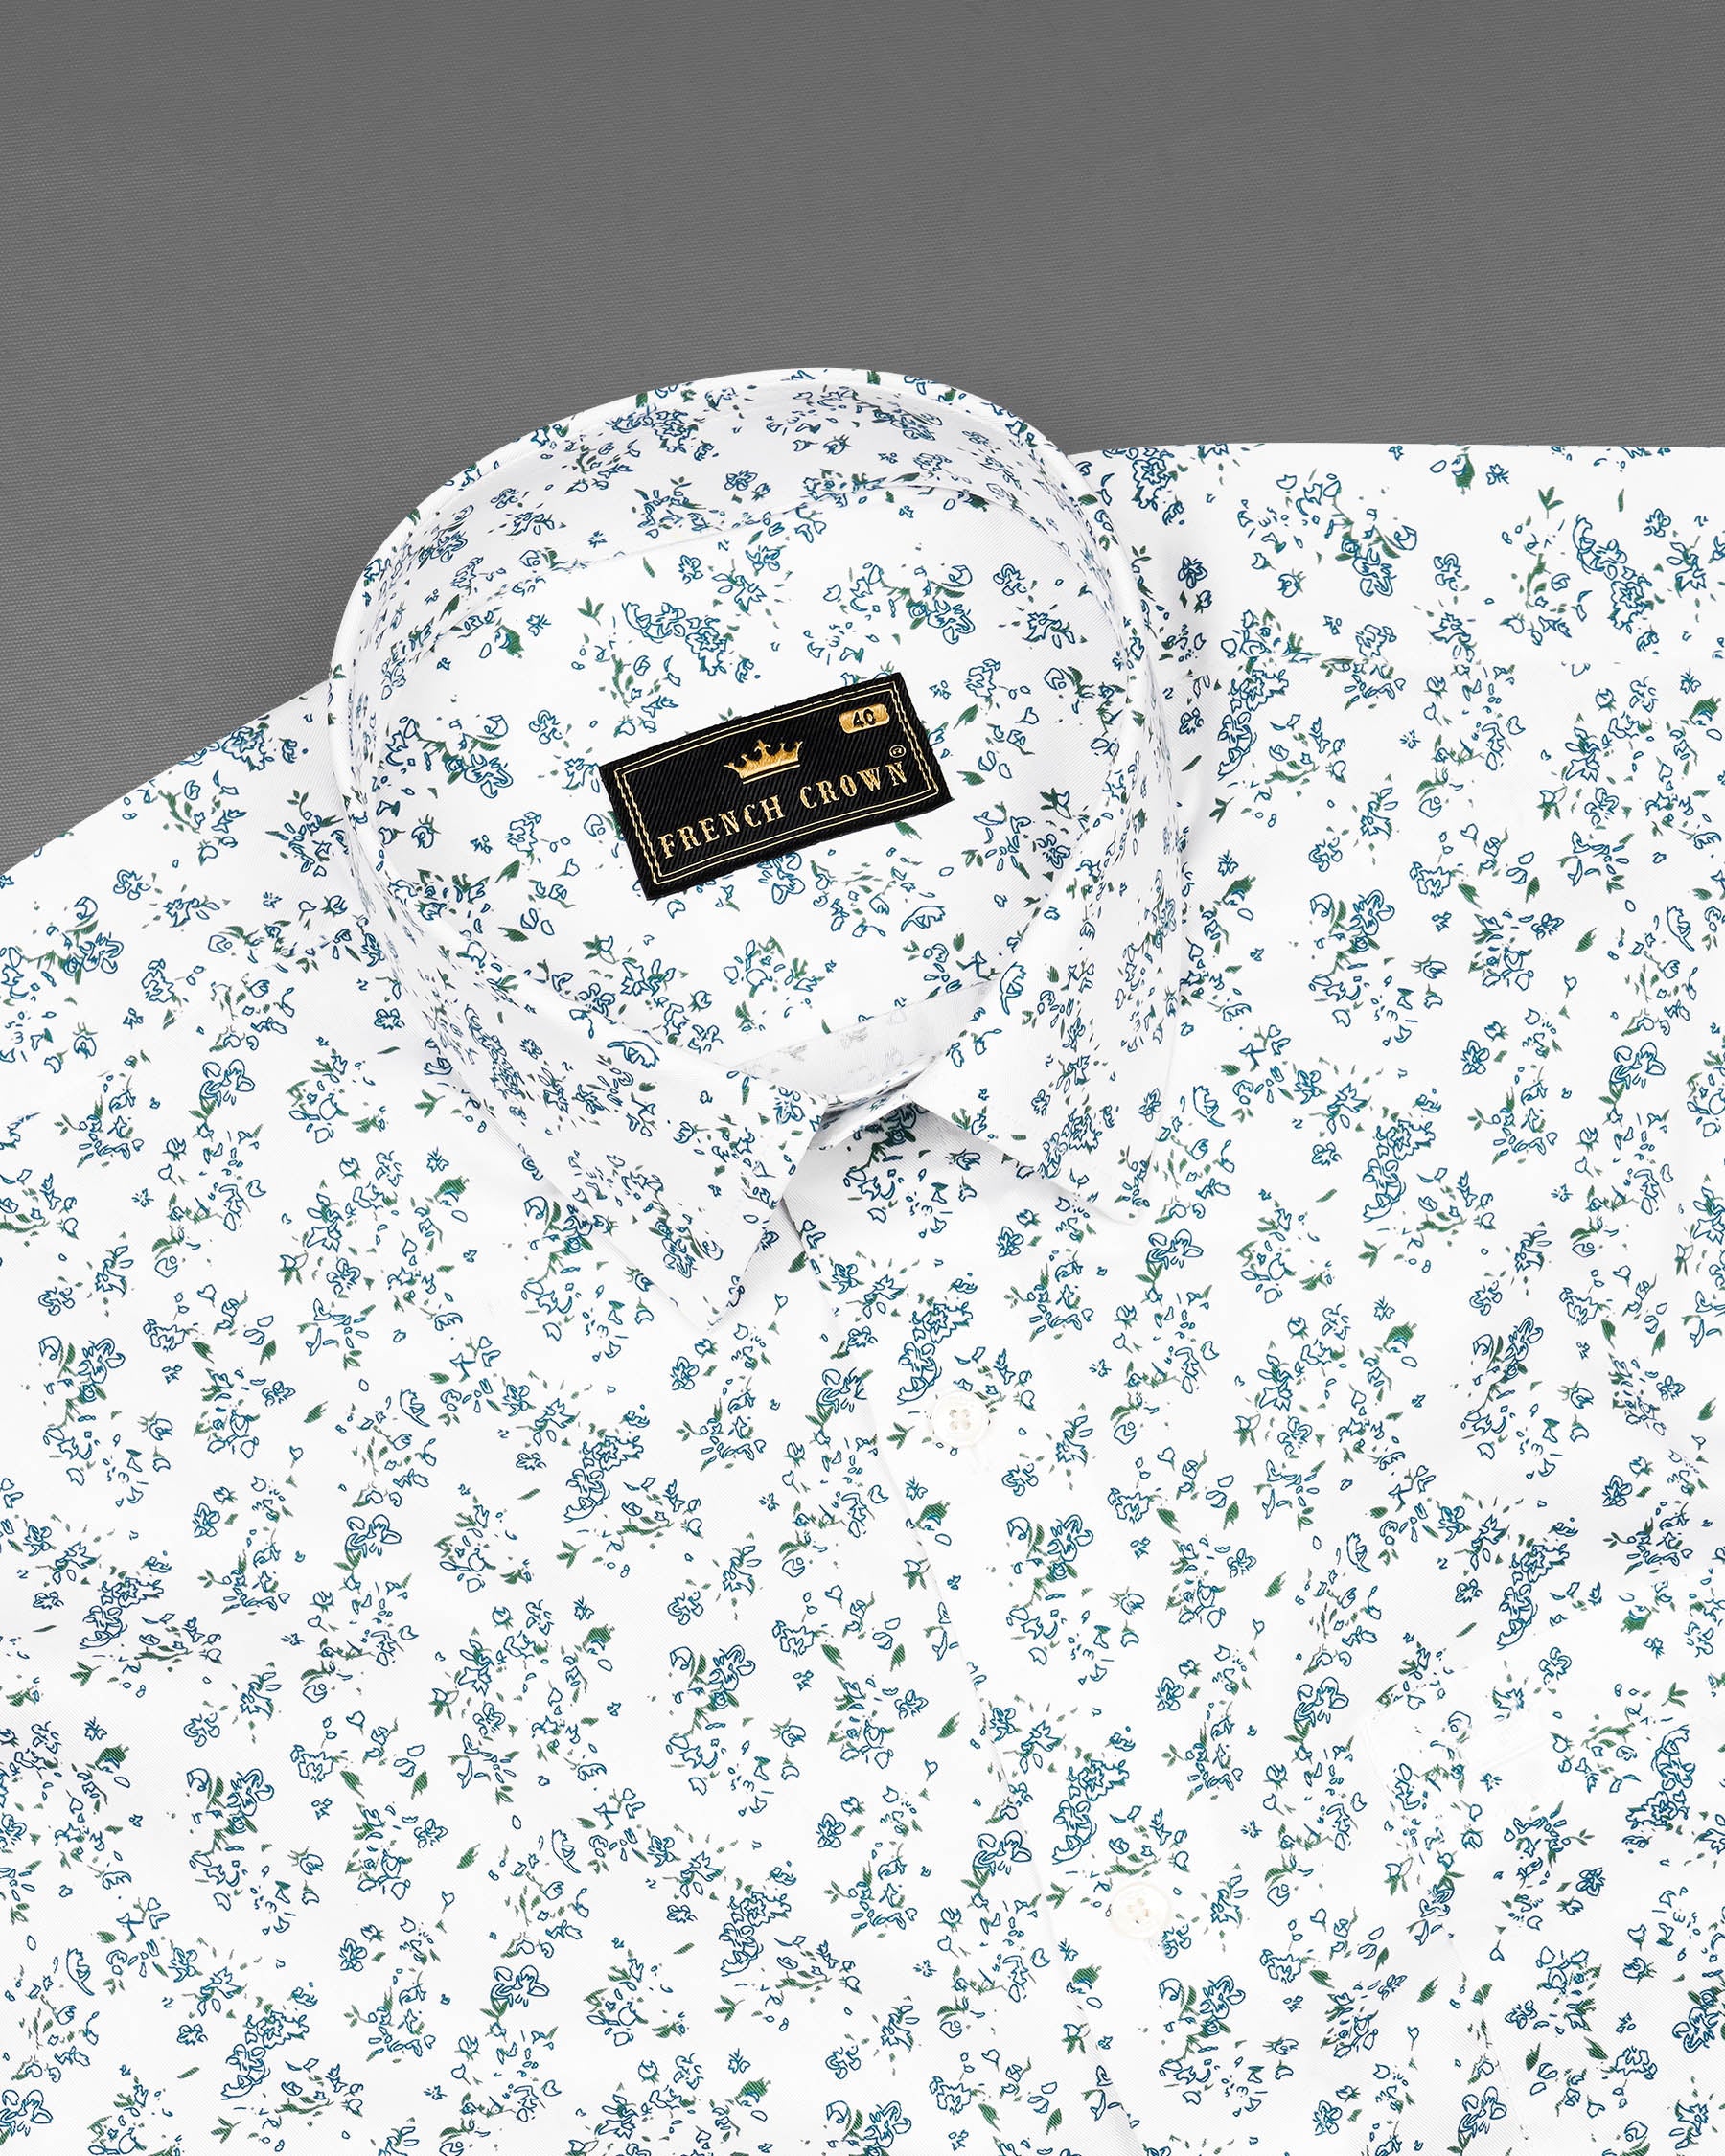 Bright White Quirky Twill Textured With Ditzy Printed Premium Cotton Shirt